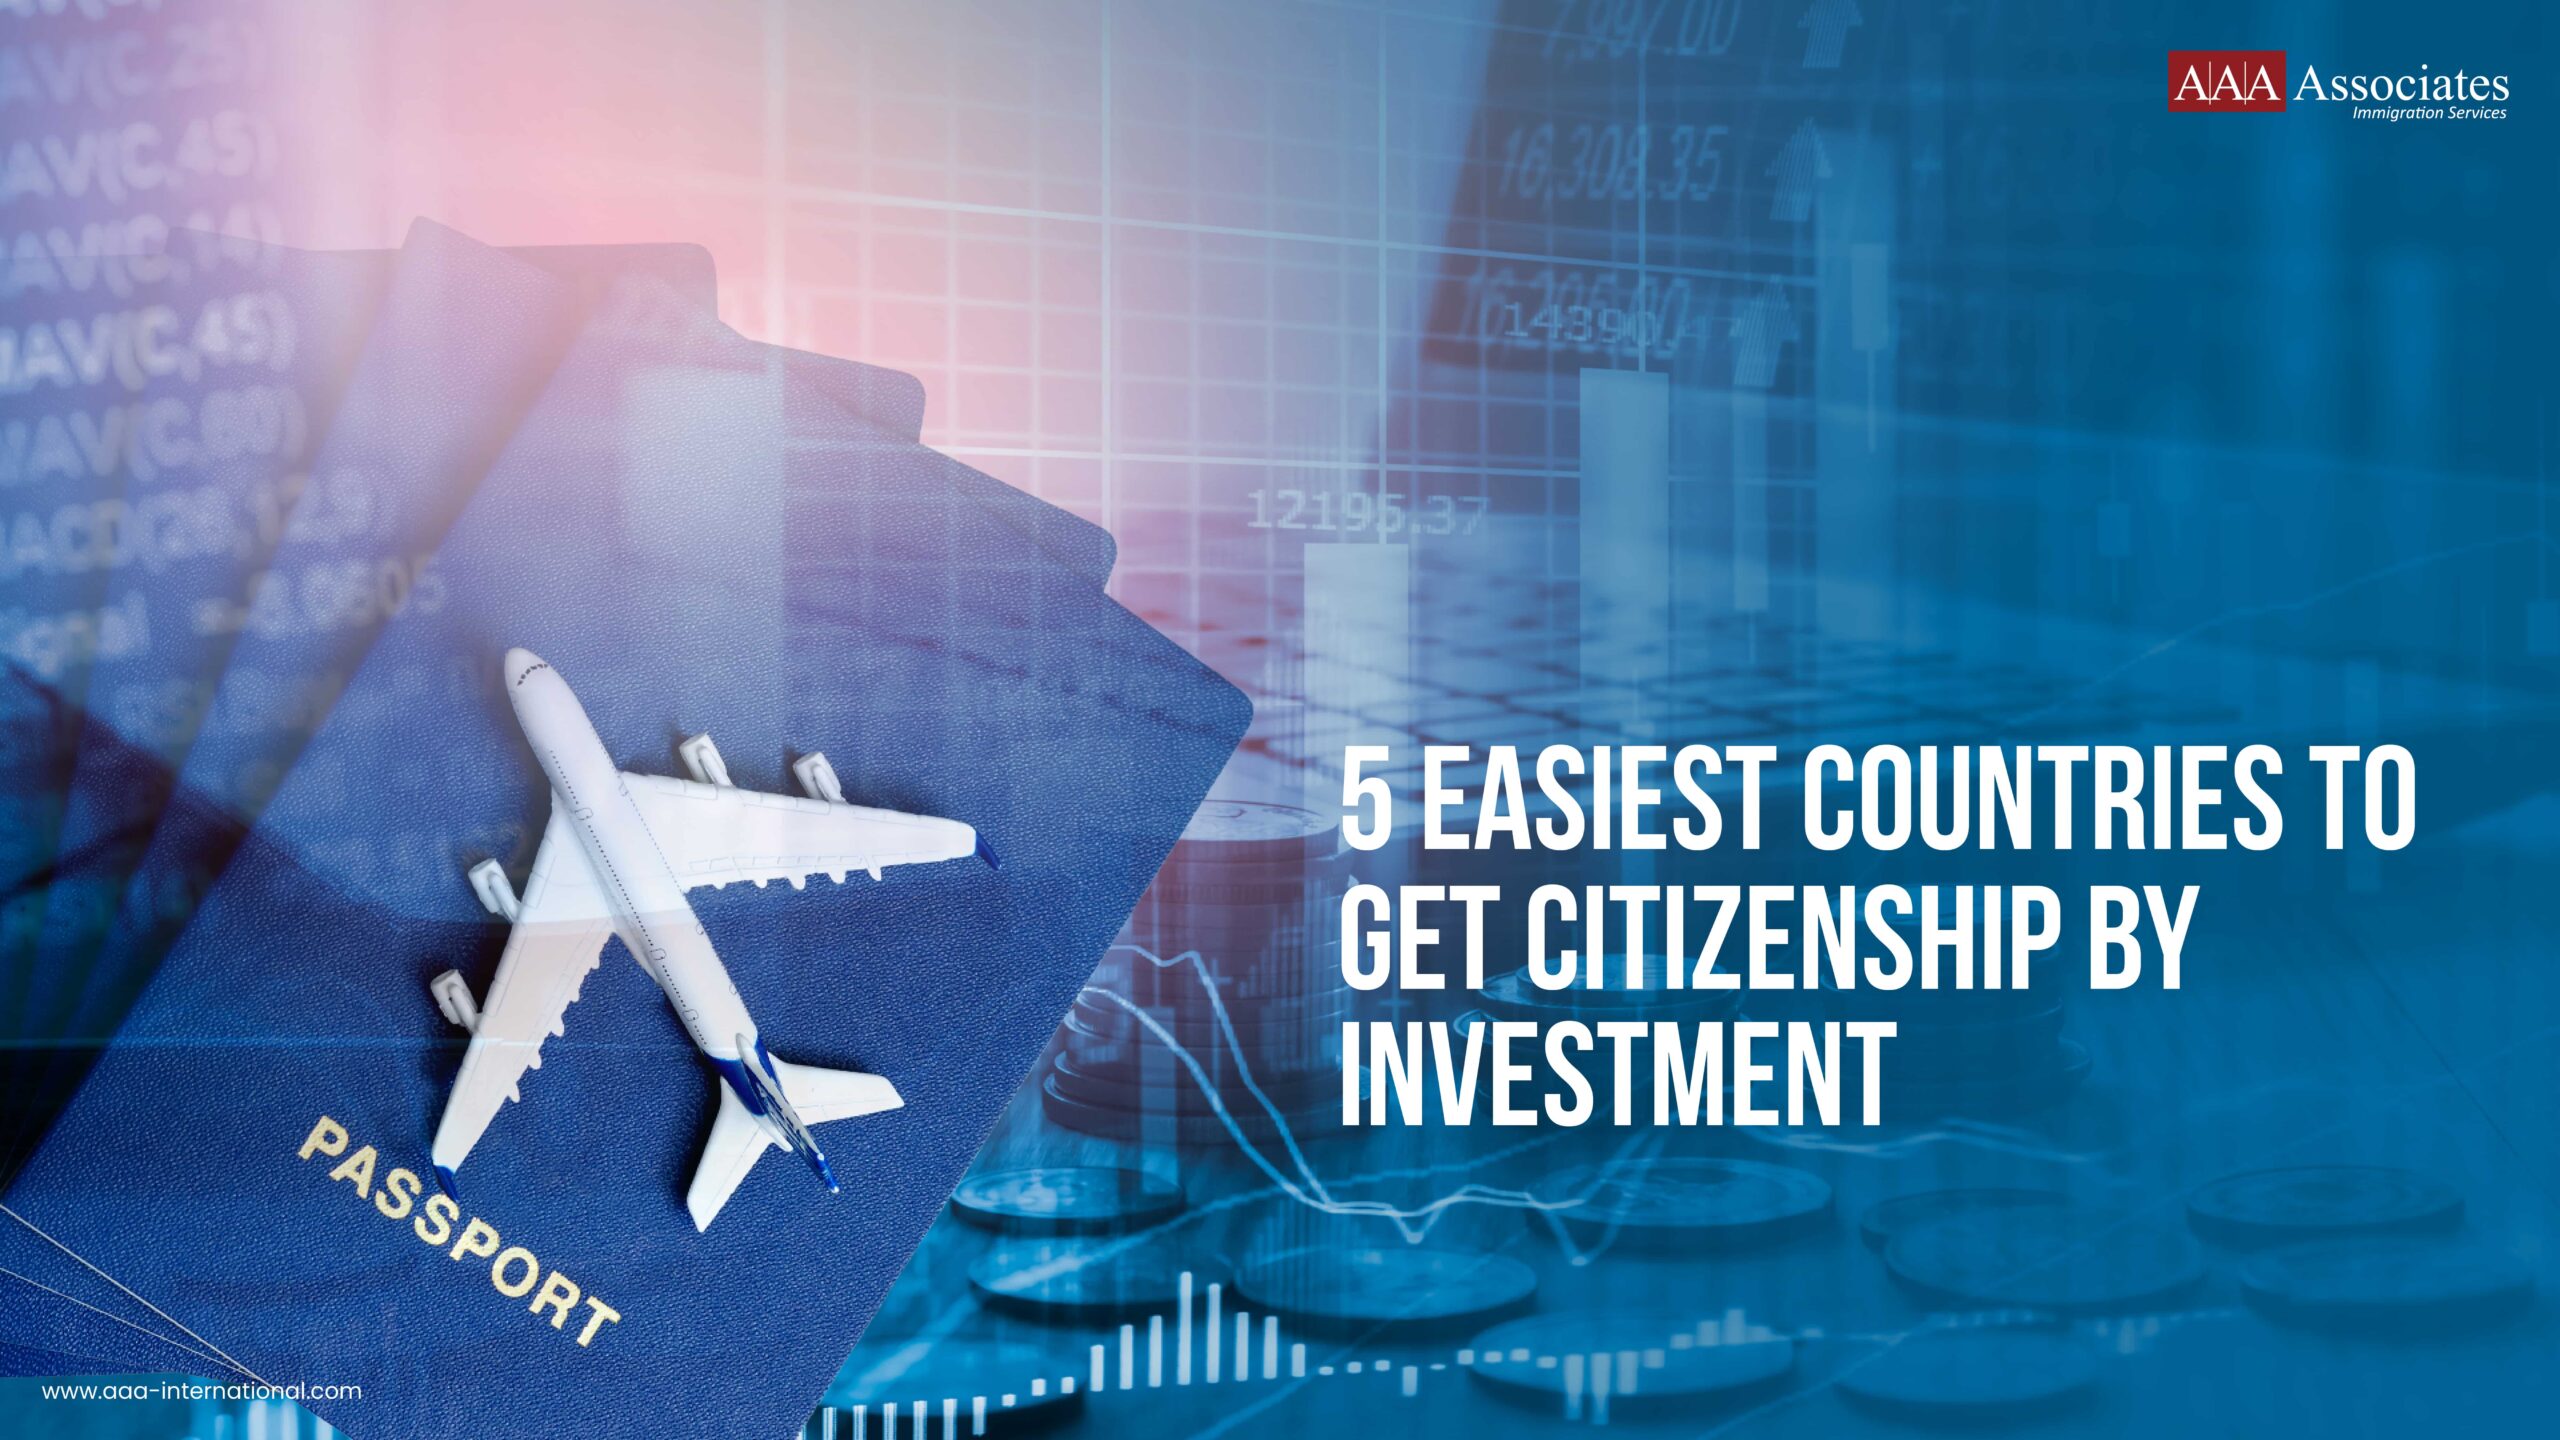 Five Easiest Countries to Get Citizenship by Investment